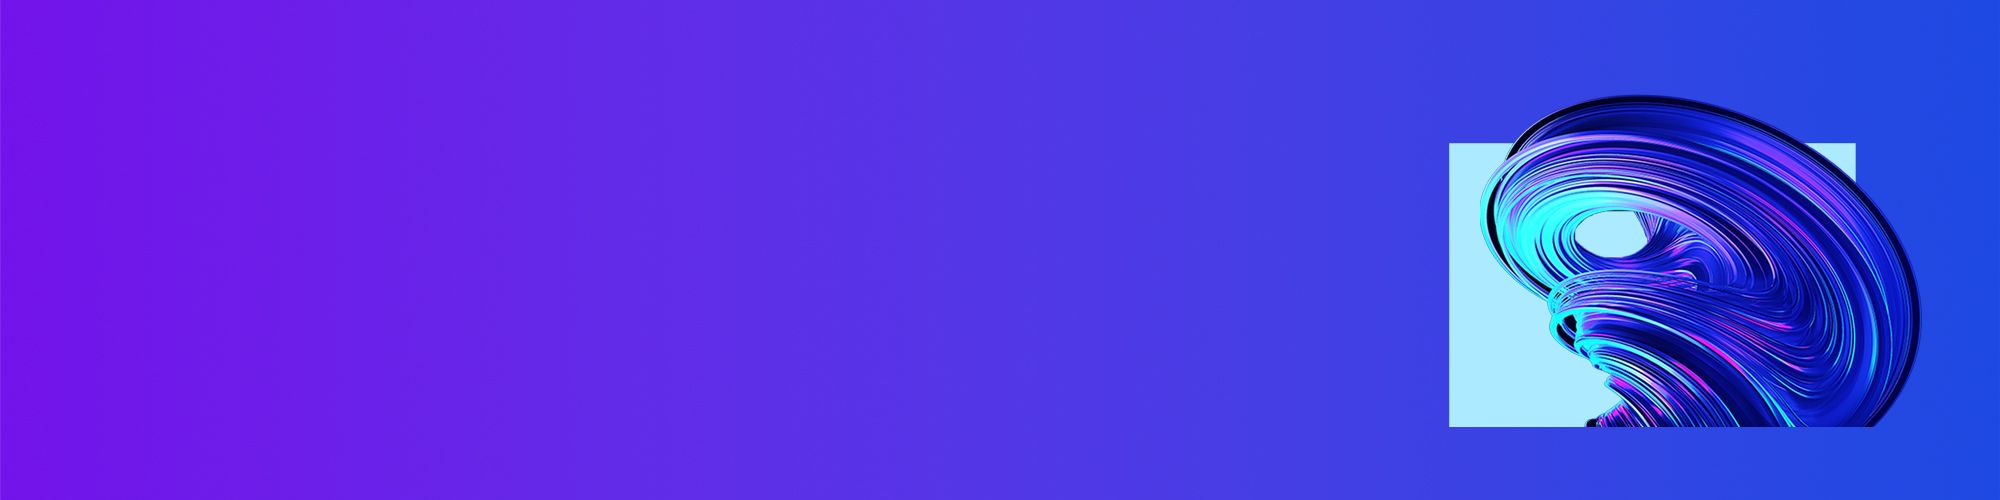 blue violet abstract